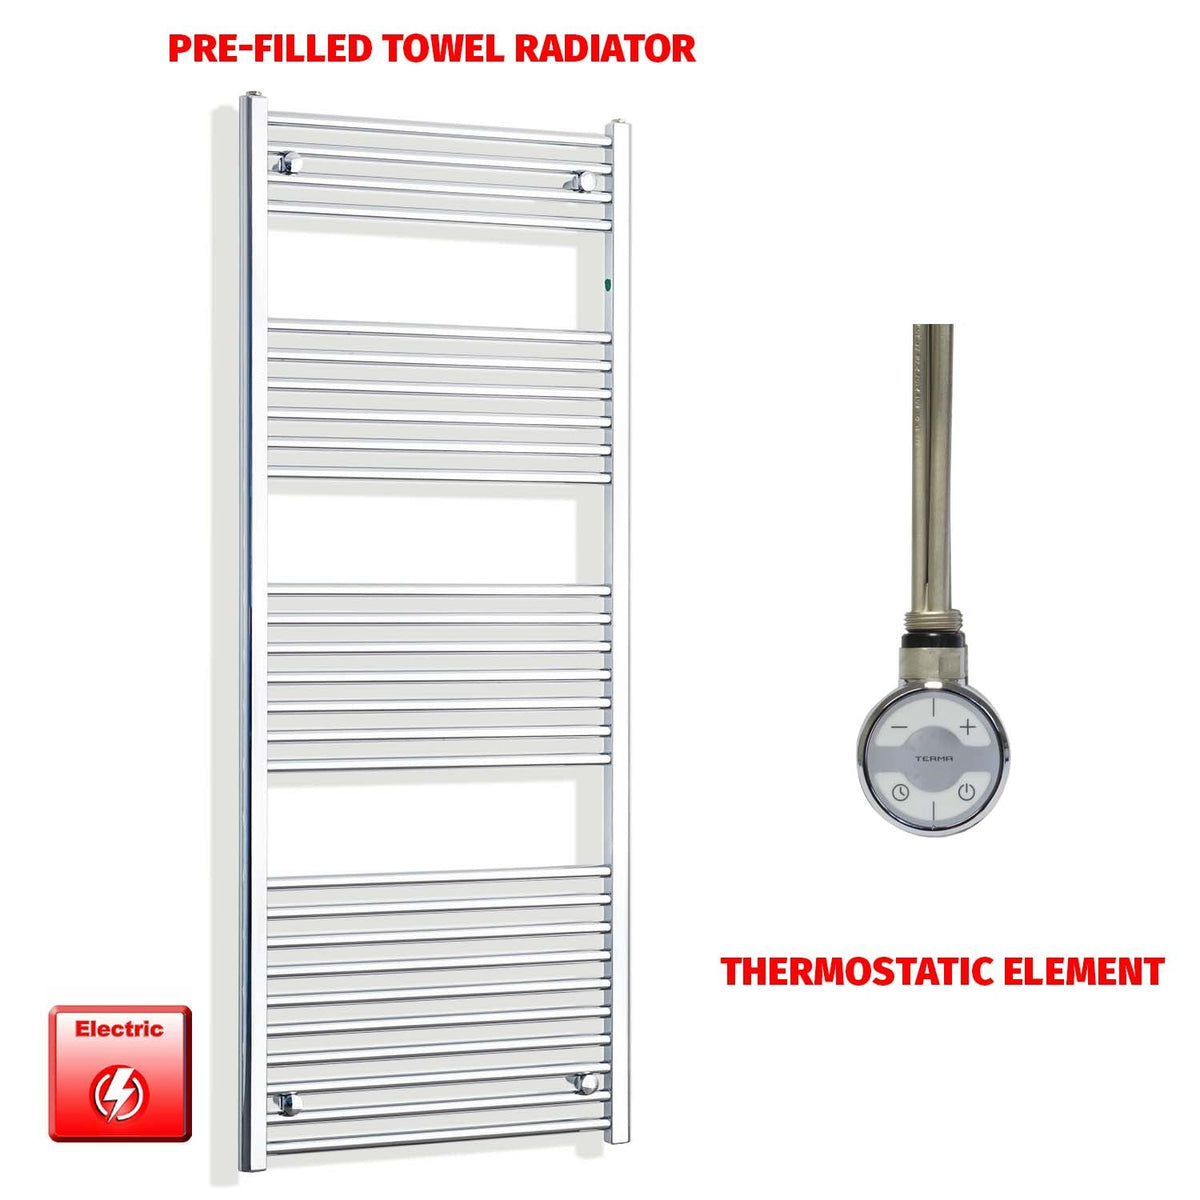 1600mm High 500mm Wide Pre-Filled Electric Heated Towel Radiator Straight or Curved Chrome MOA Thermostatic element no timer